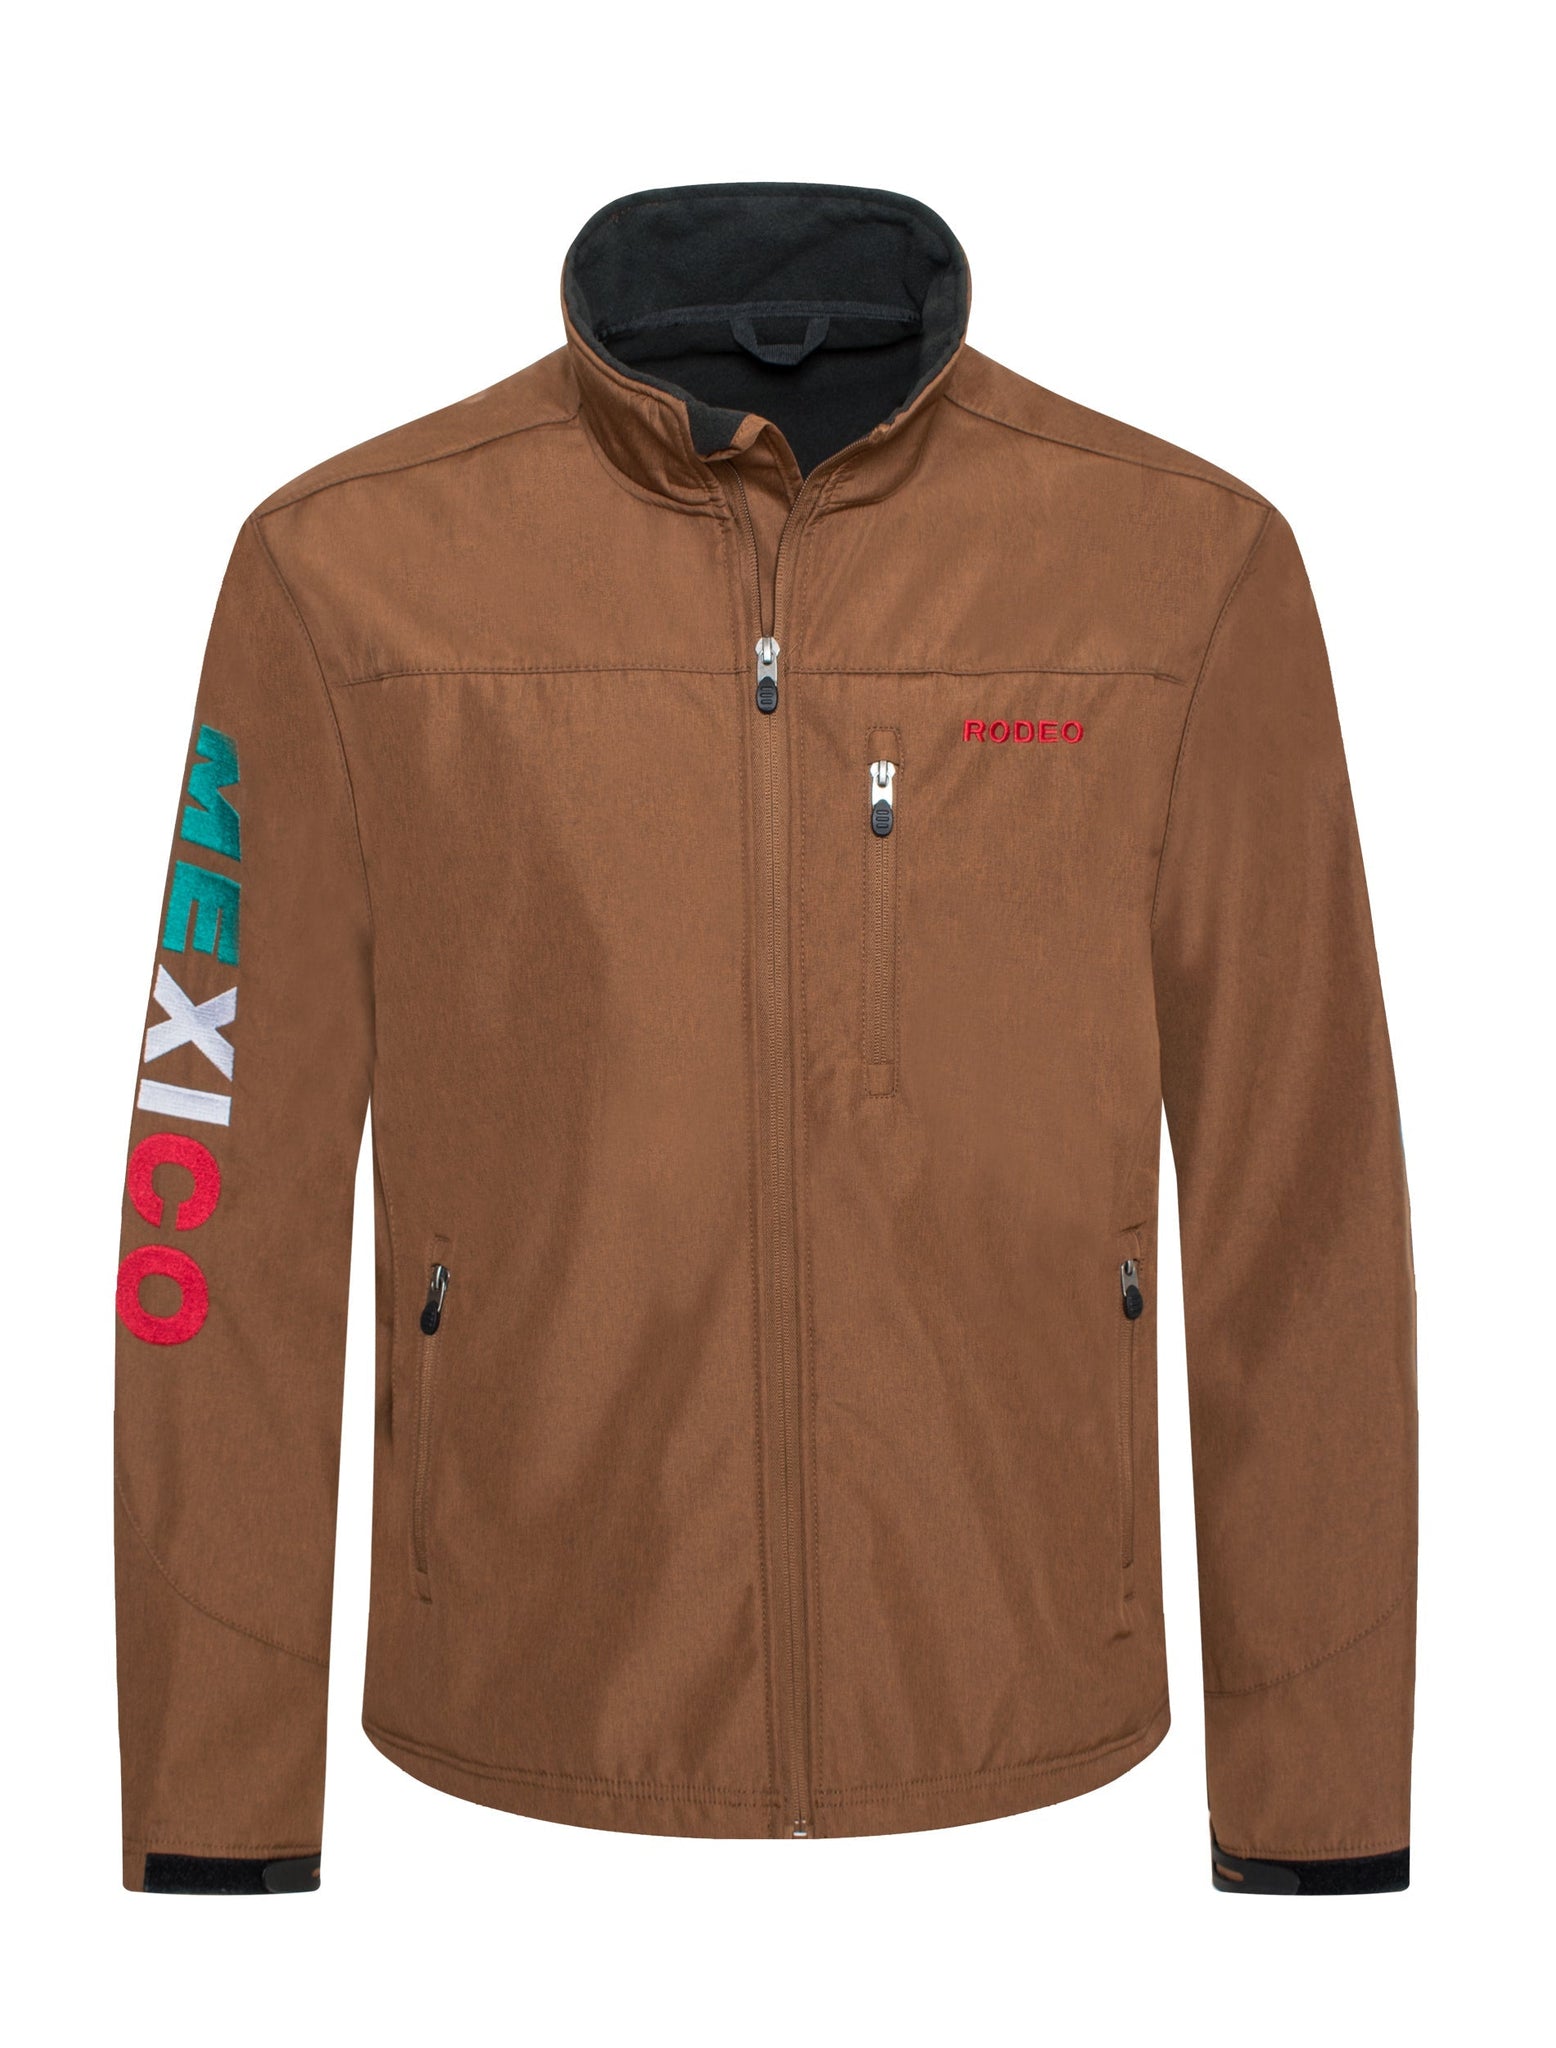 Men's Soft Shell Bonded Jacket With Embroidery -NJ650EMB-MHL-COGNAC